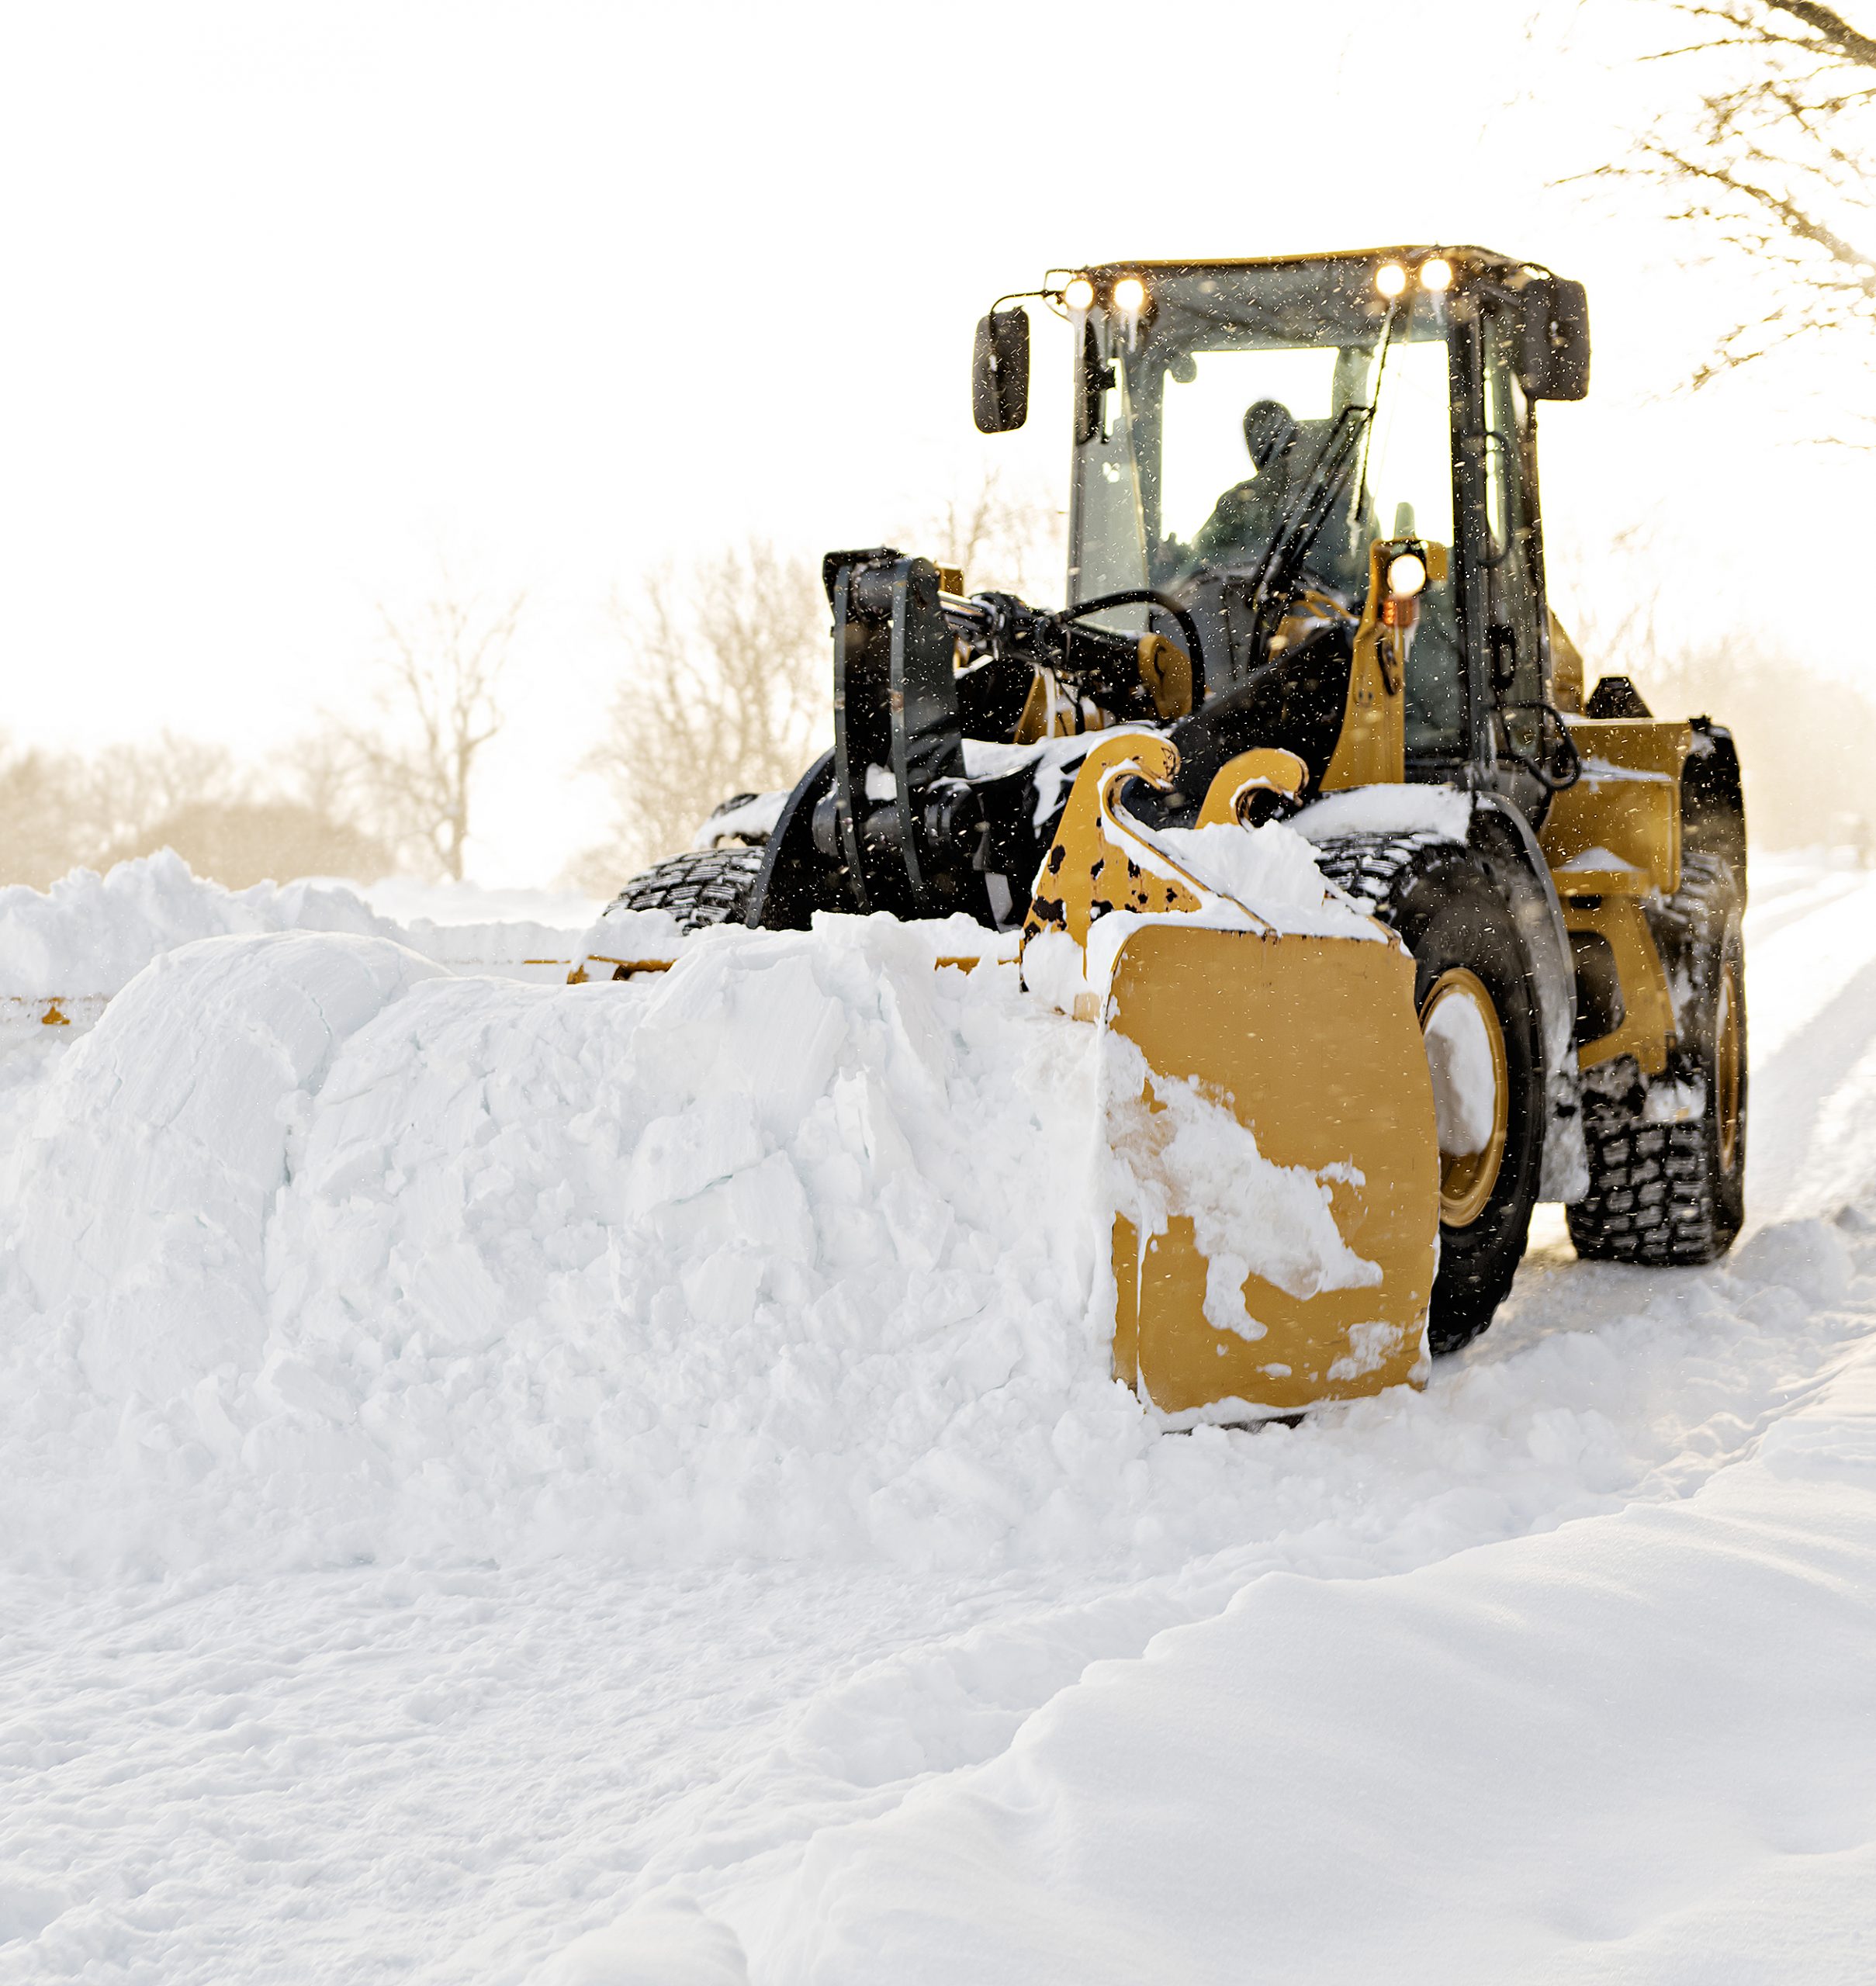 Wheel Loader Removing Snow With Snow Pusher